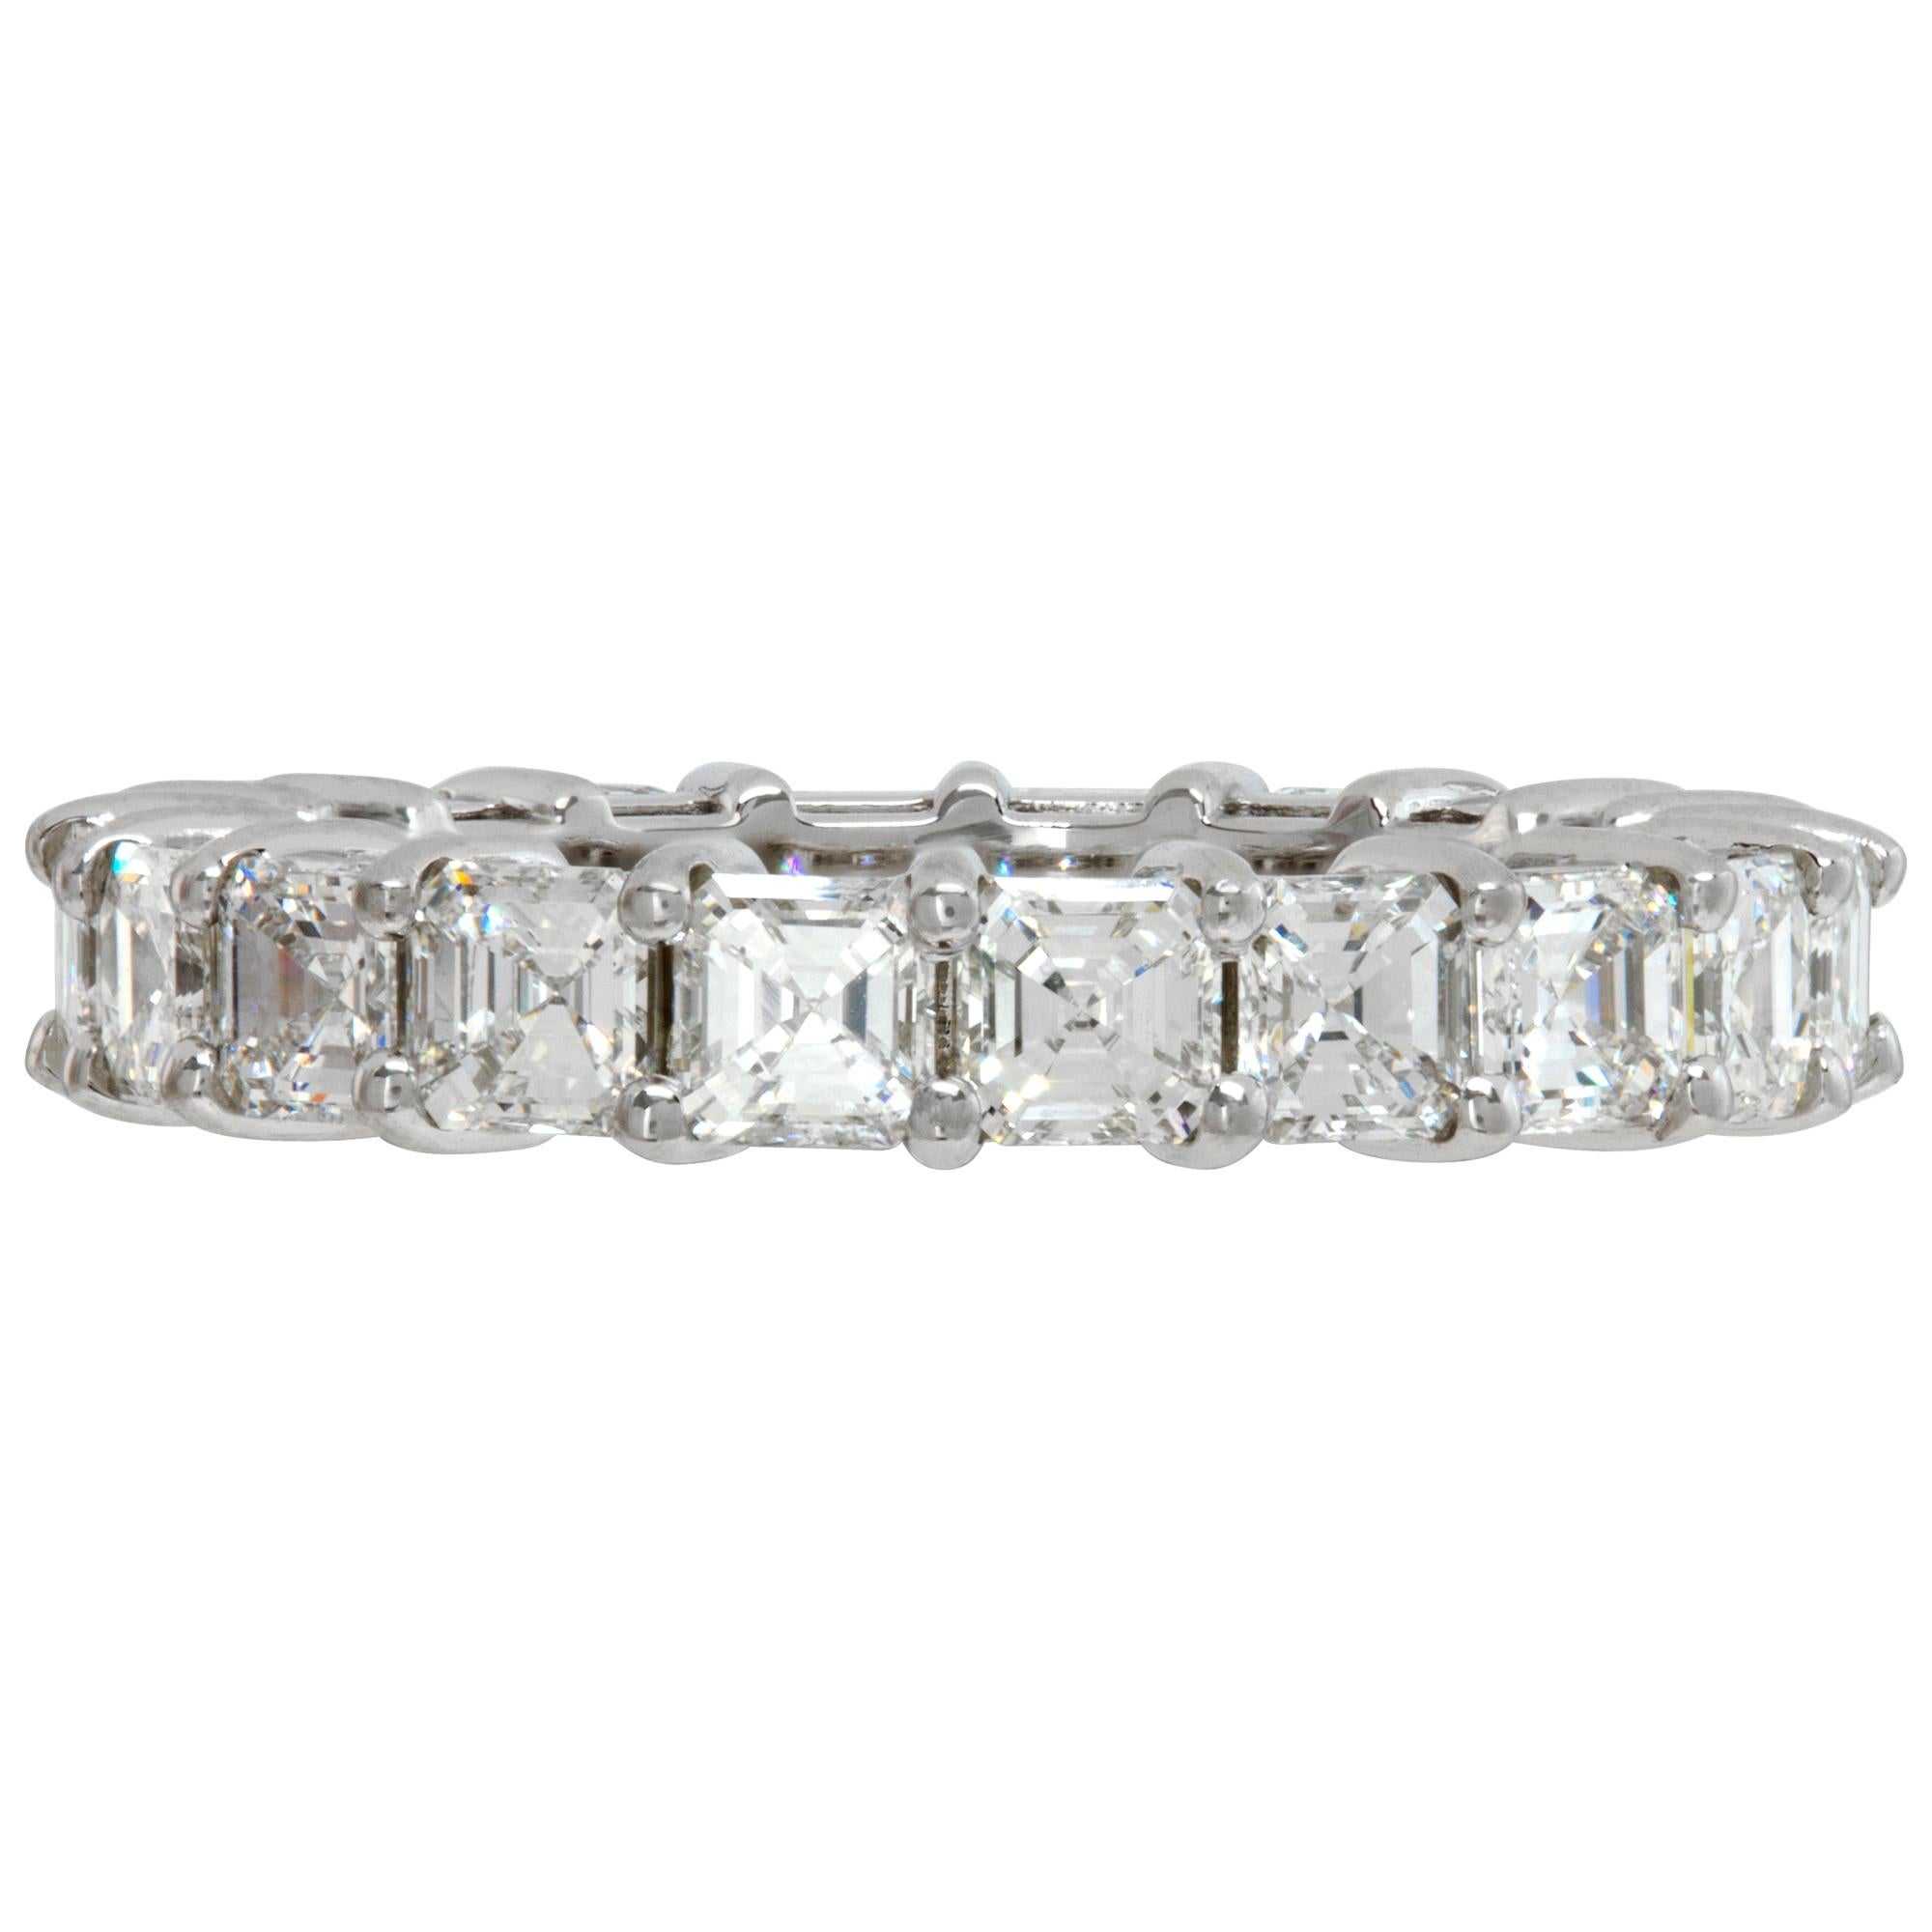 Ascher cut diamond eternity band in platinum with approximately 4.00 carats in diamonds (F-G color, VS clarity). Size 6